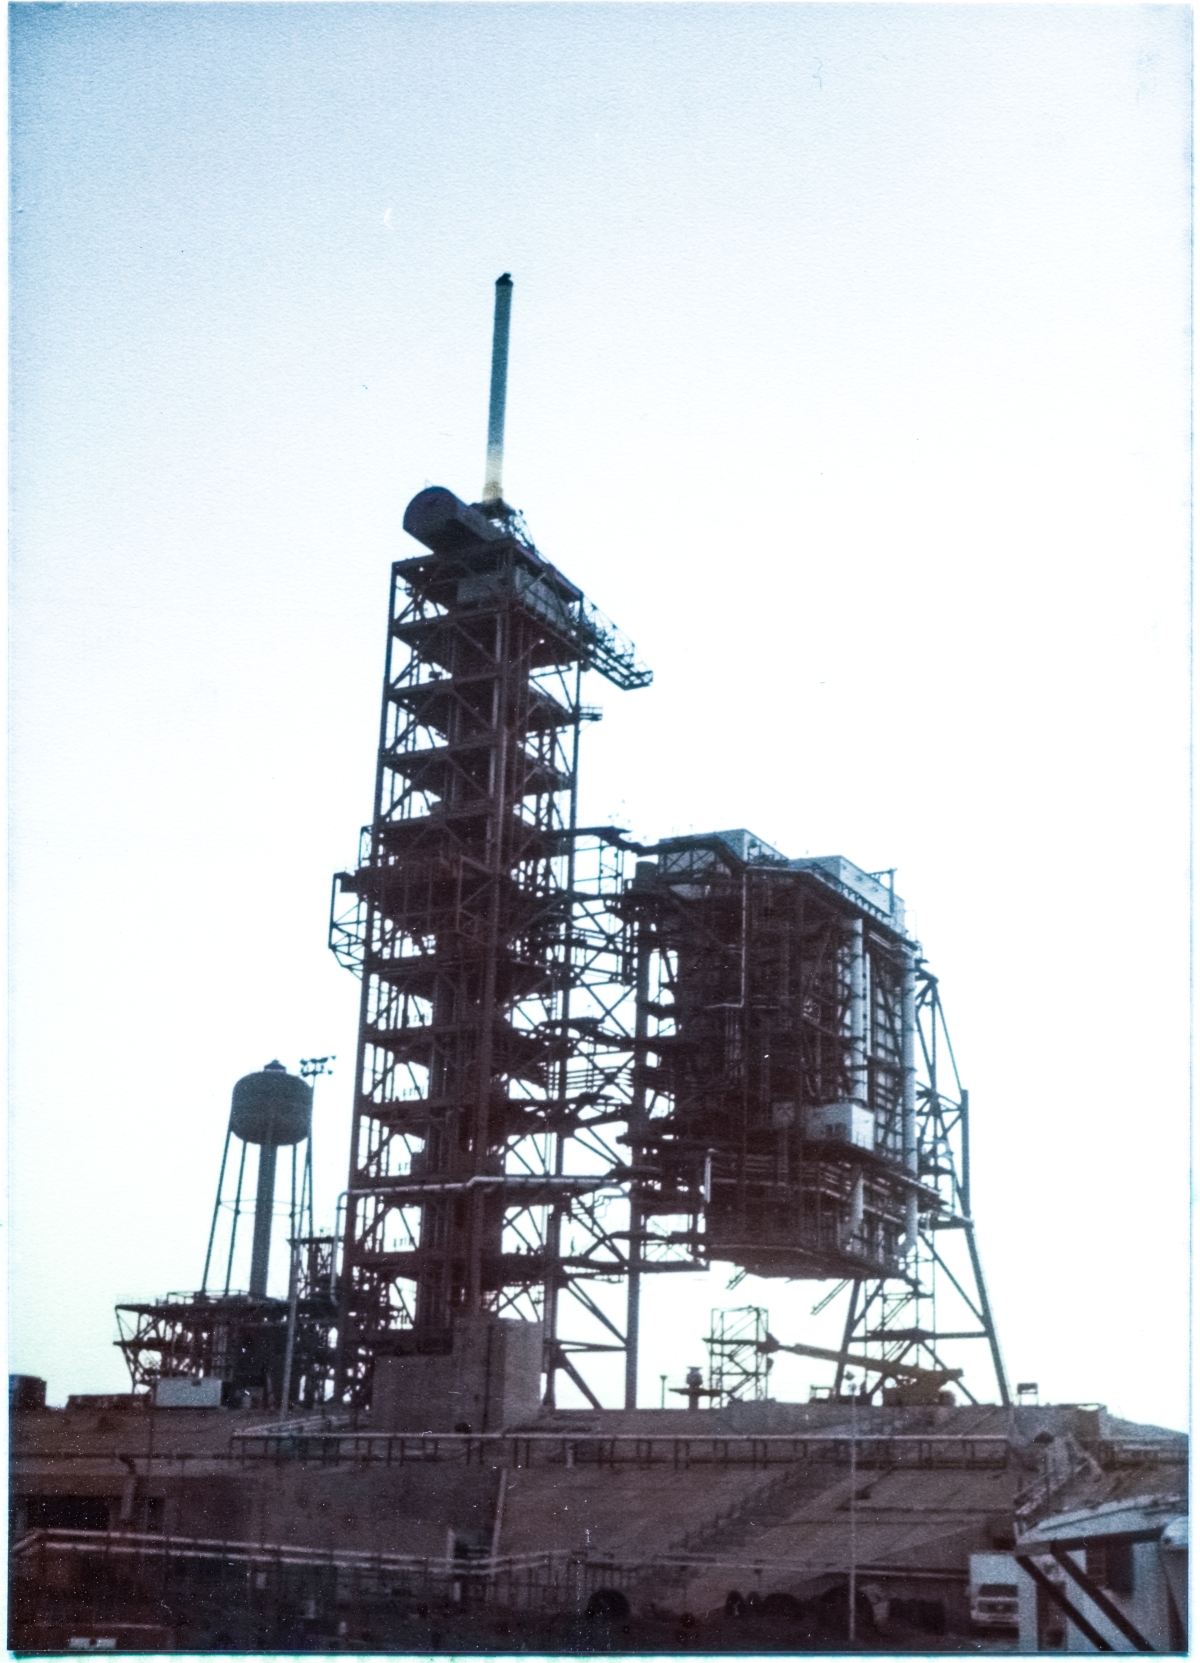 Image 048. The Rotating Service Structure at Space Shuttle Launch Complex 39-B, Kennedy Space Center, Florida, constructed by Union Ironworkers from Local 808 working for Wilhoit Steel Erectors, no longer exists in the position it had occupied during the years it was being built. Its first functional proof-test is complete, and it has smoothly traveled out over and across the Flame Trench to the position it will occupy when it mates with the Space Shuttles it was designed to service. Four million pounds of steel no longer sits where it once was, and now rests in a location where it has never been before. Photo by James MacLaren.